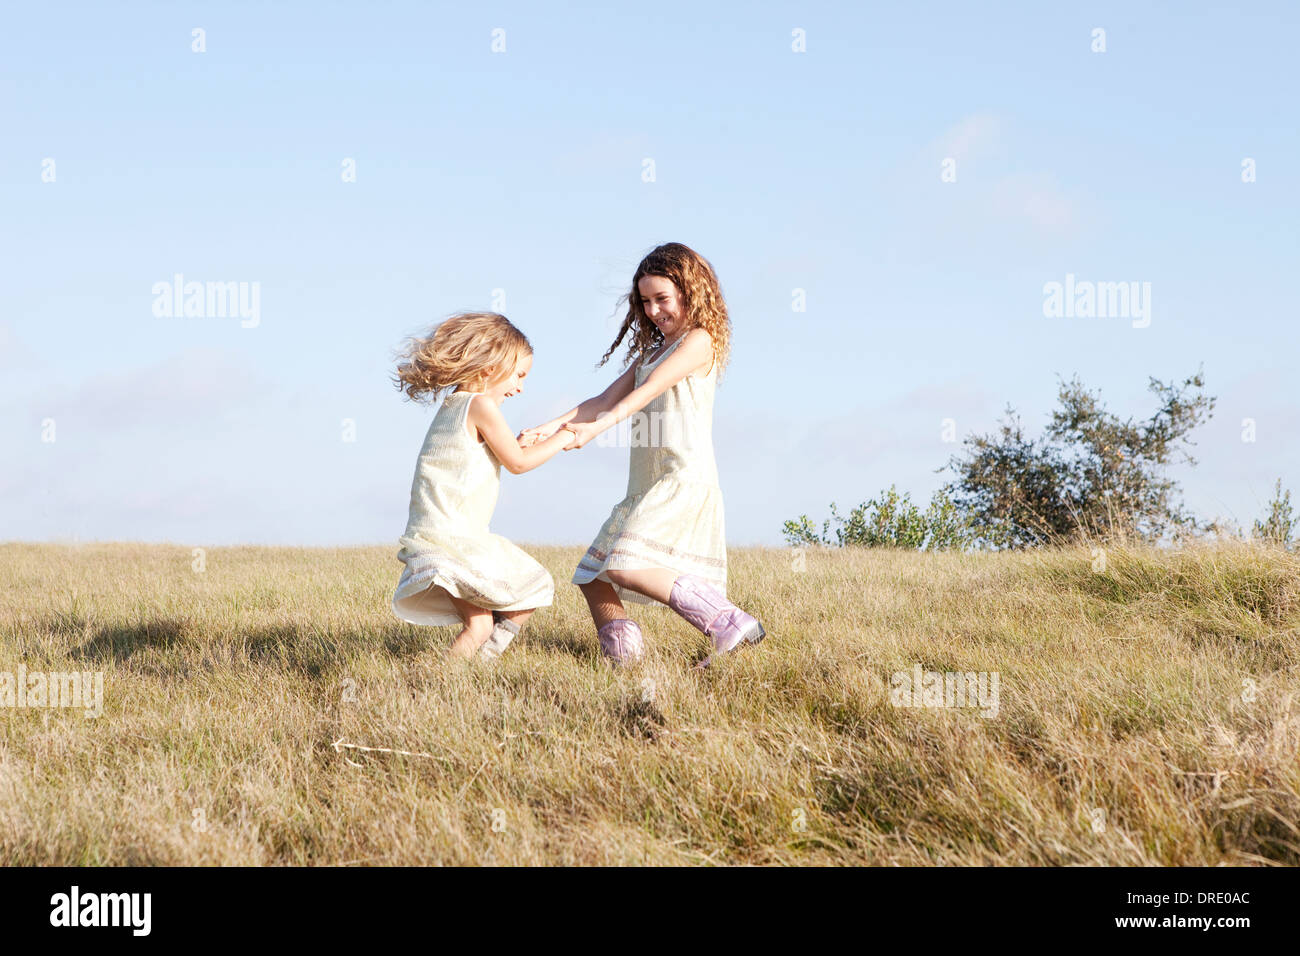 Sisters in dresses standing in field Stock Photo